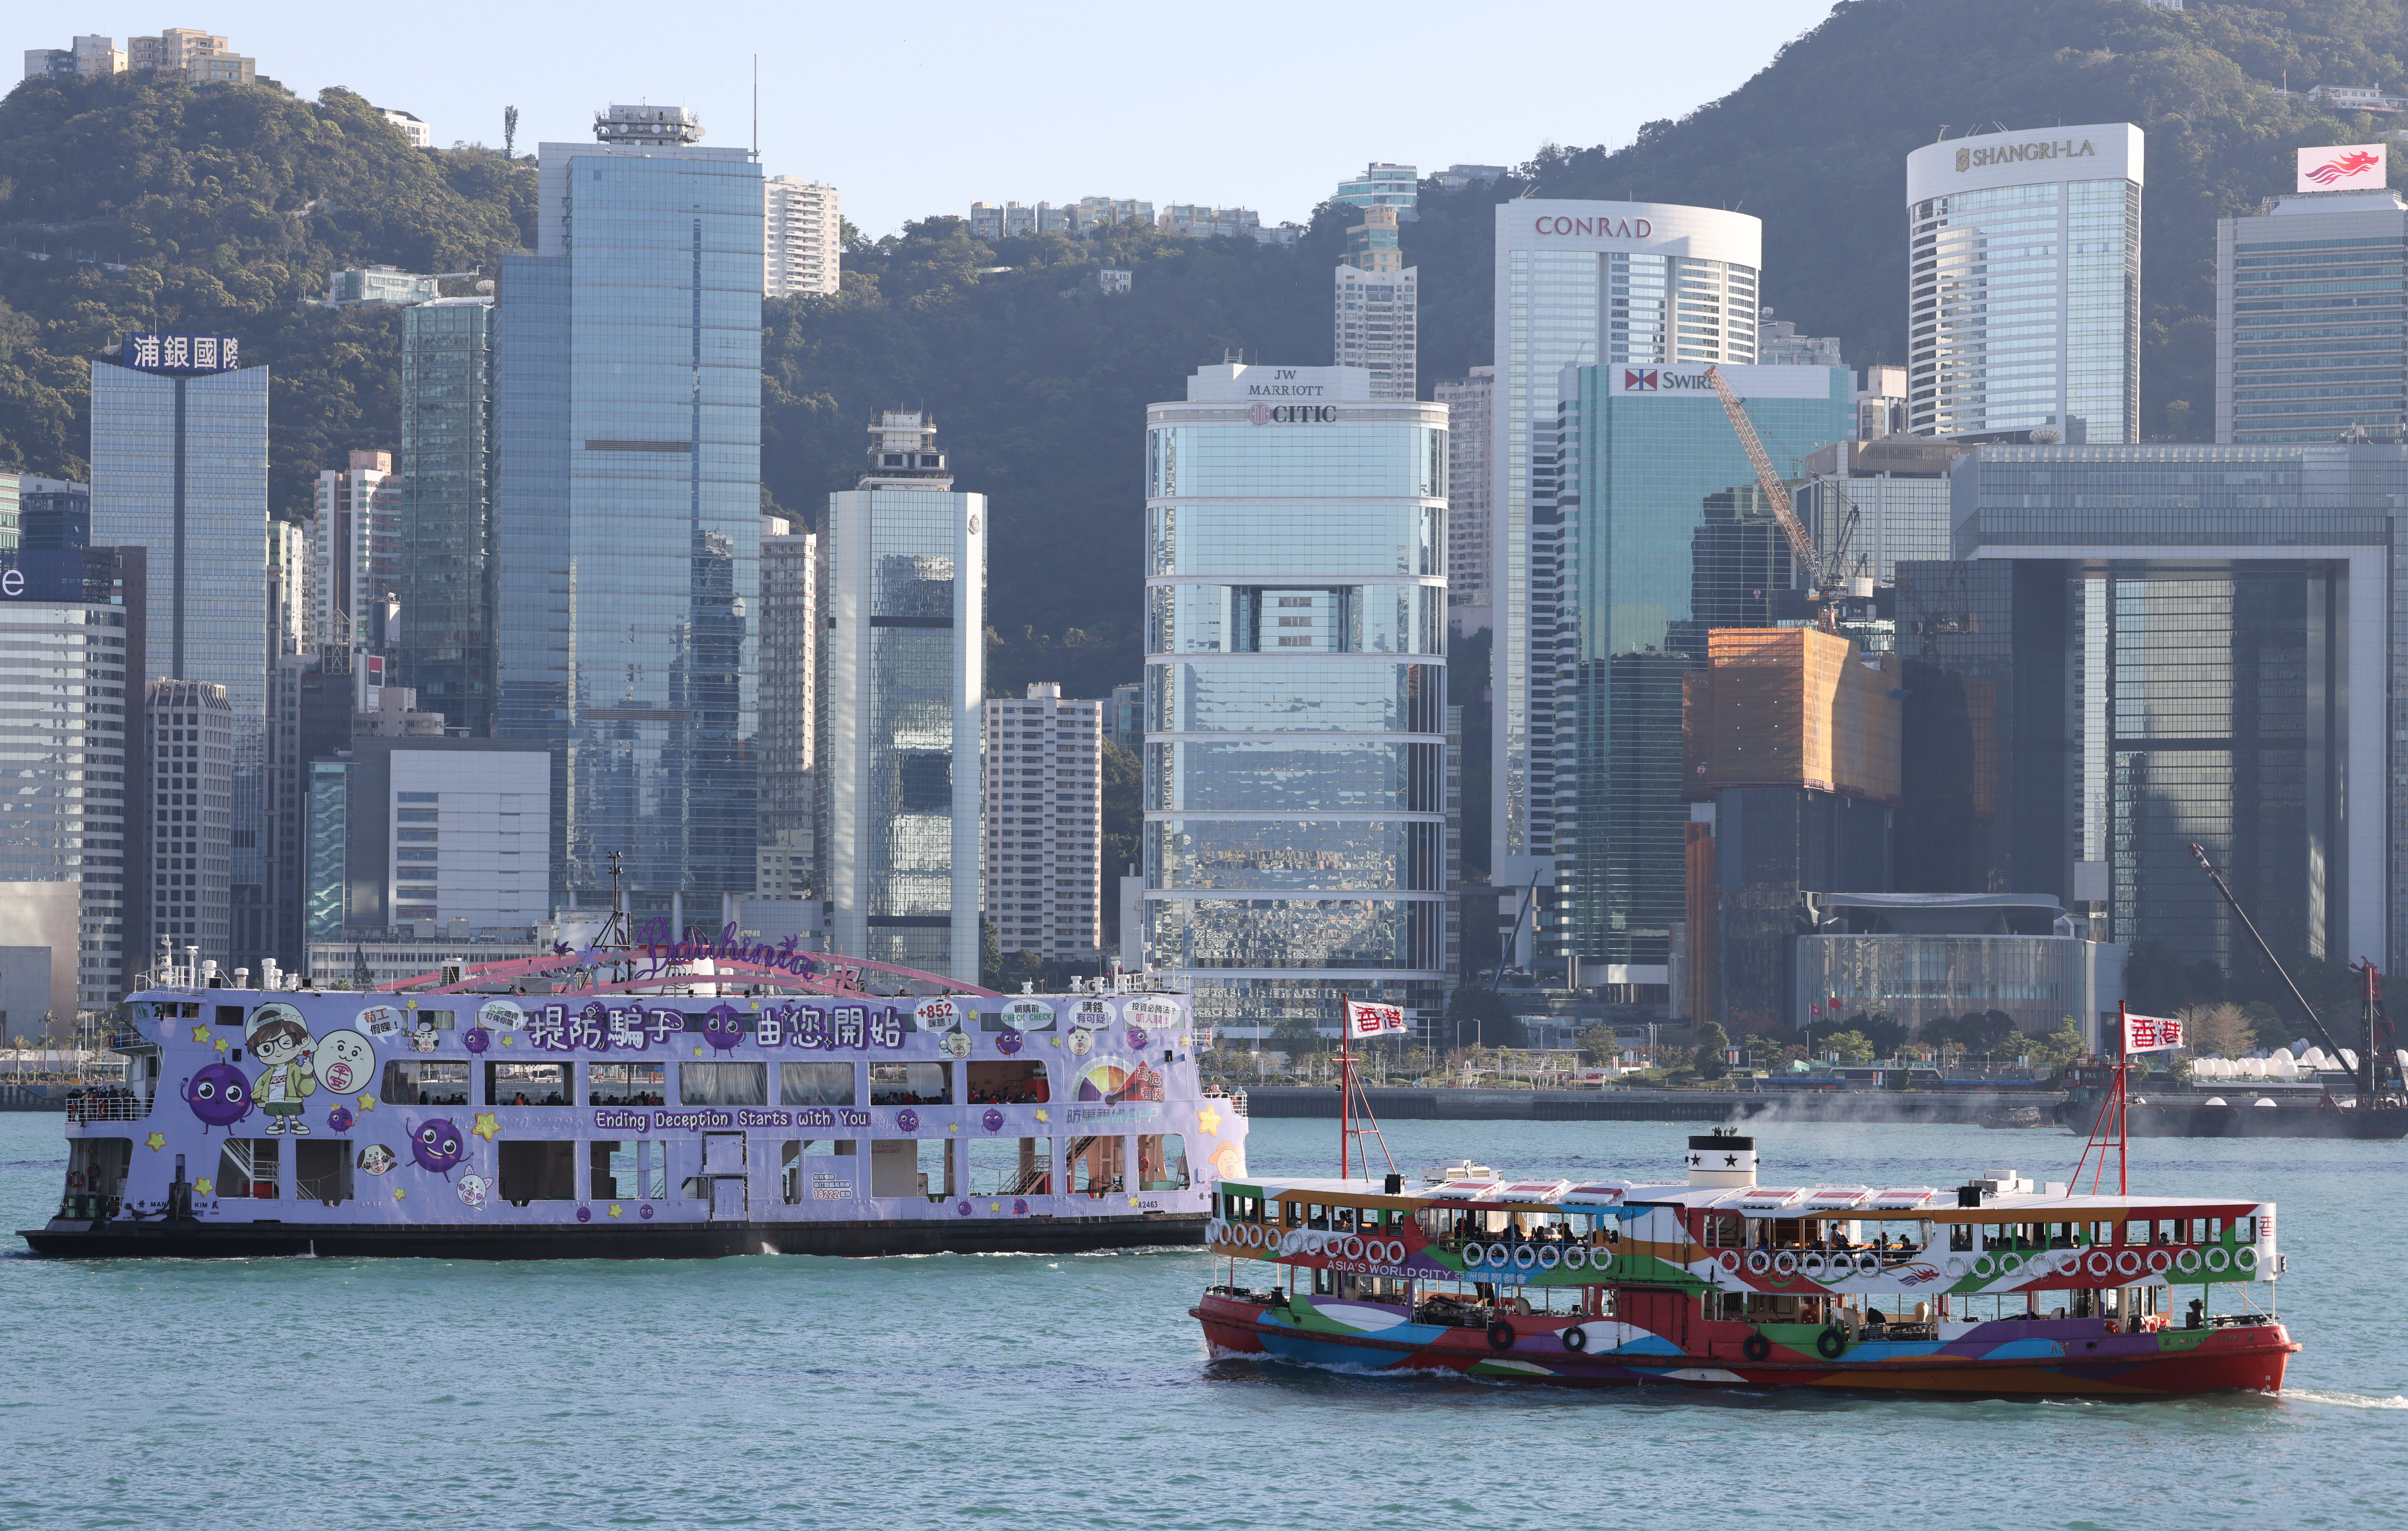 Hong Kong is ‘a prominent and vibrant city for building family legacies,’ says chairman of the Asian Family Legacy Foundation. Photo: Jelly Tse